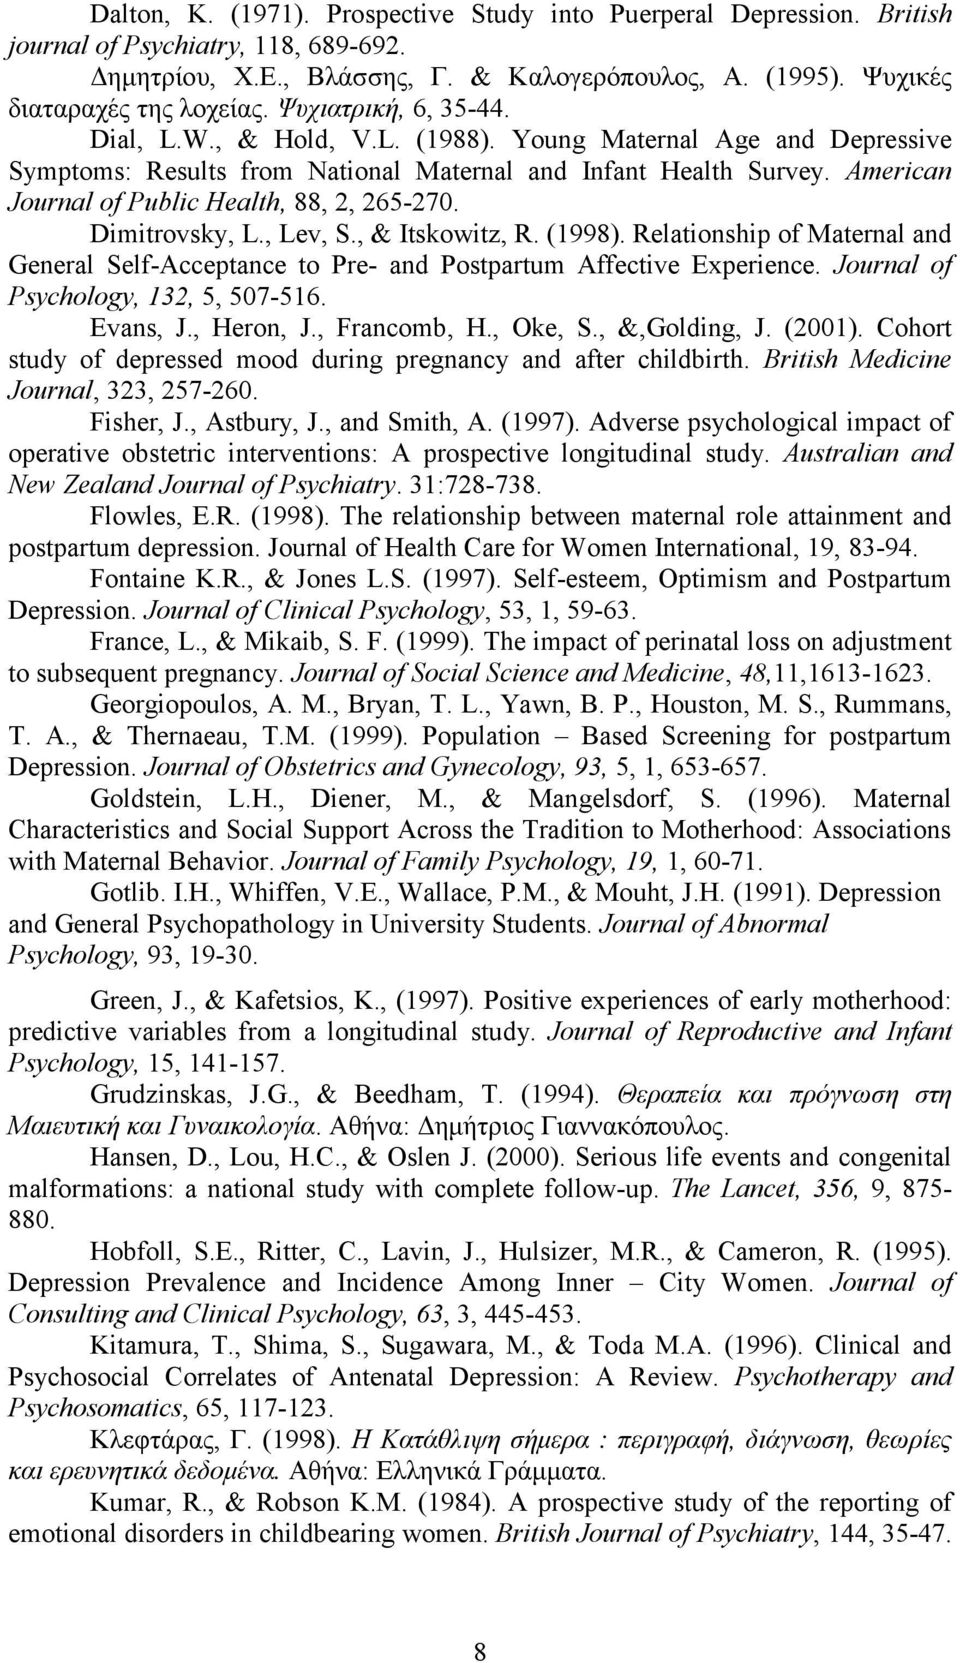 American Journal of Public Health, 88, 2, 265-270. Dimitrovsky, L., Lev, S., & Itskowitz, R. (1998). Relationship of Maternal and General Self-Acceptance to Pre- and Postpartum Affective Experience.